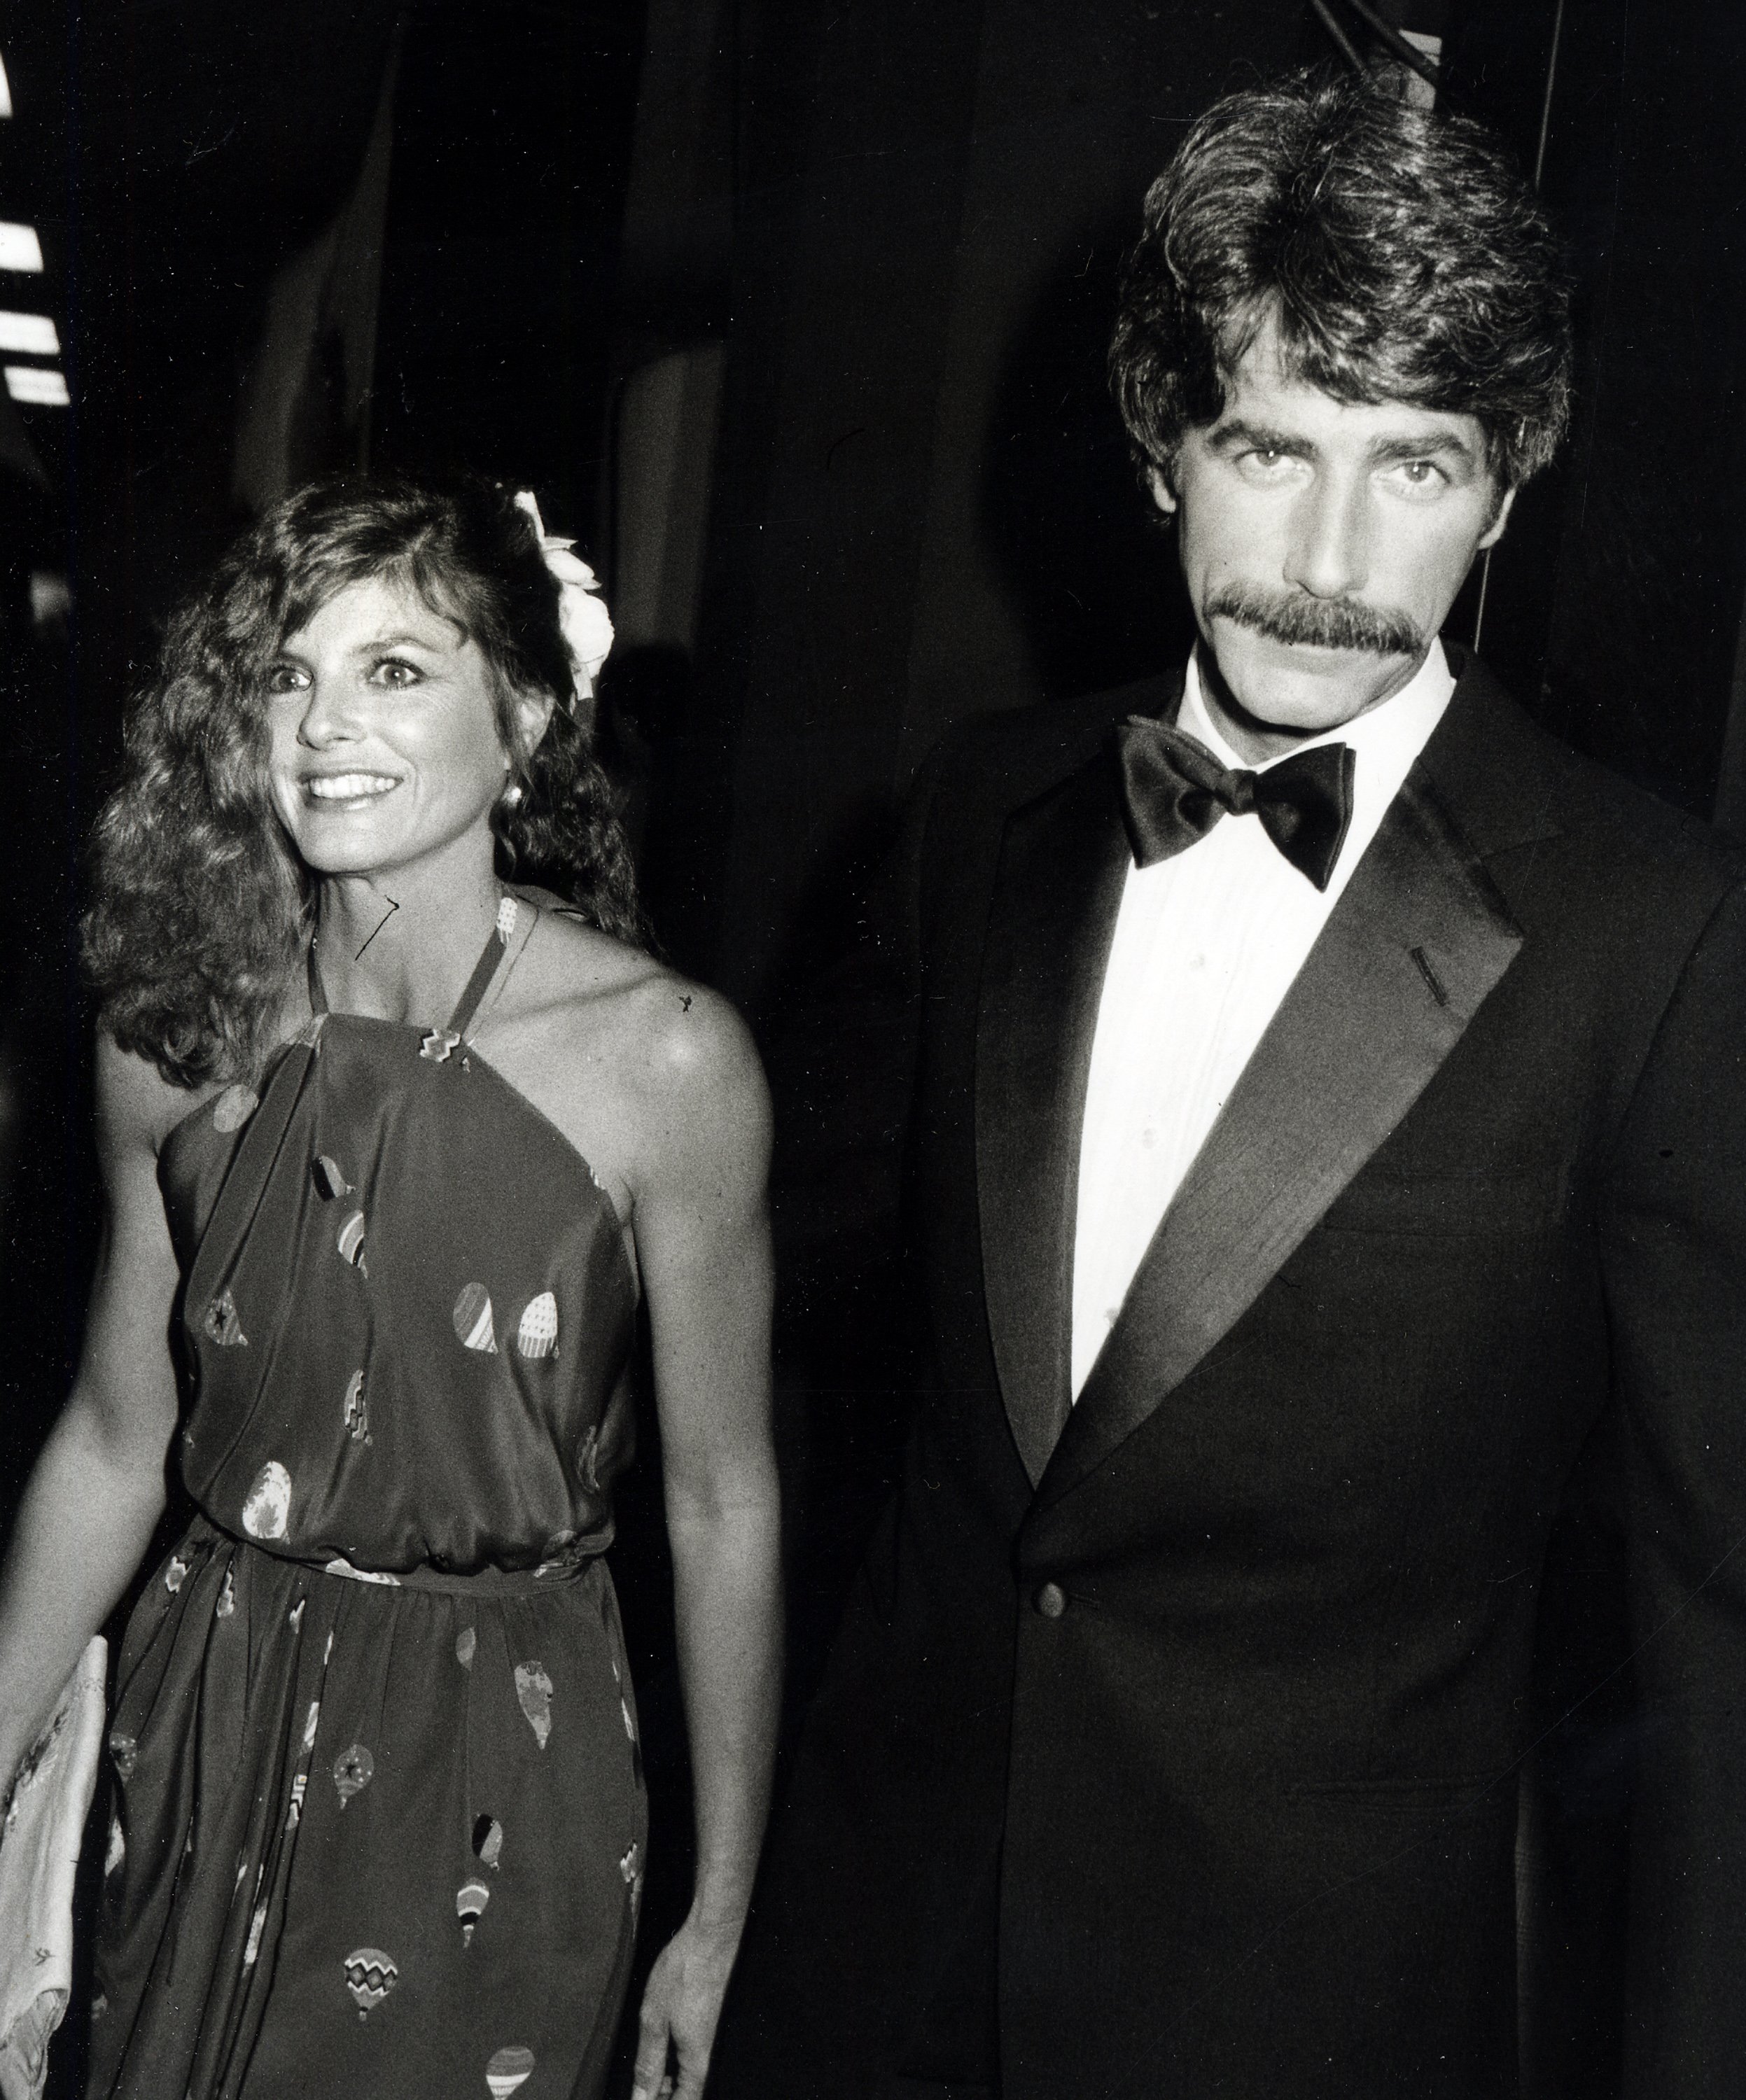 Actress Katharine Ross and actor Sam Elliott attending 16th Annual Academy of Country Music Awards on April 30, 1981 at Shrine Auditorium in Los Angeles, California | Source: Getty Images